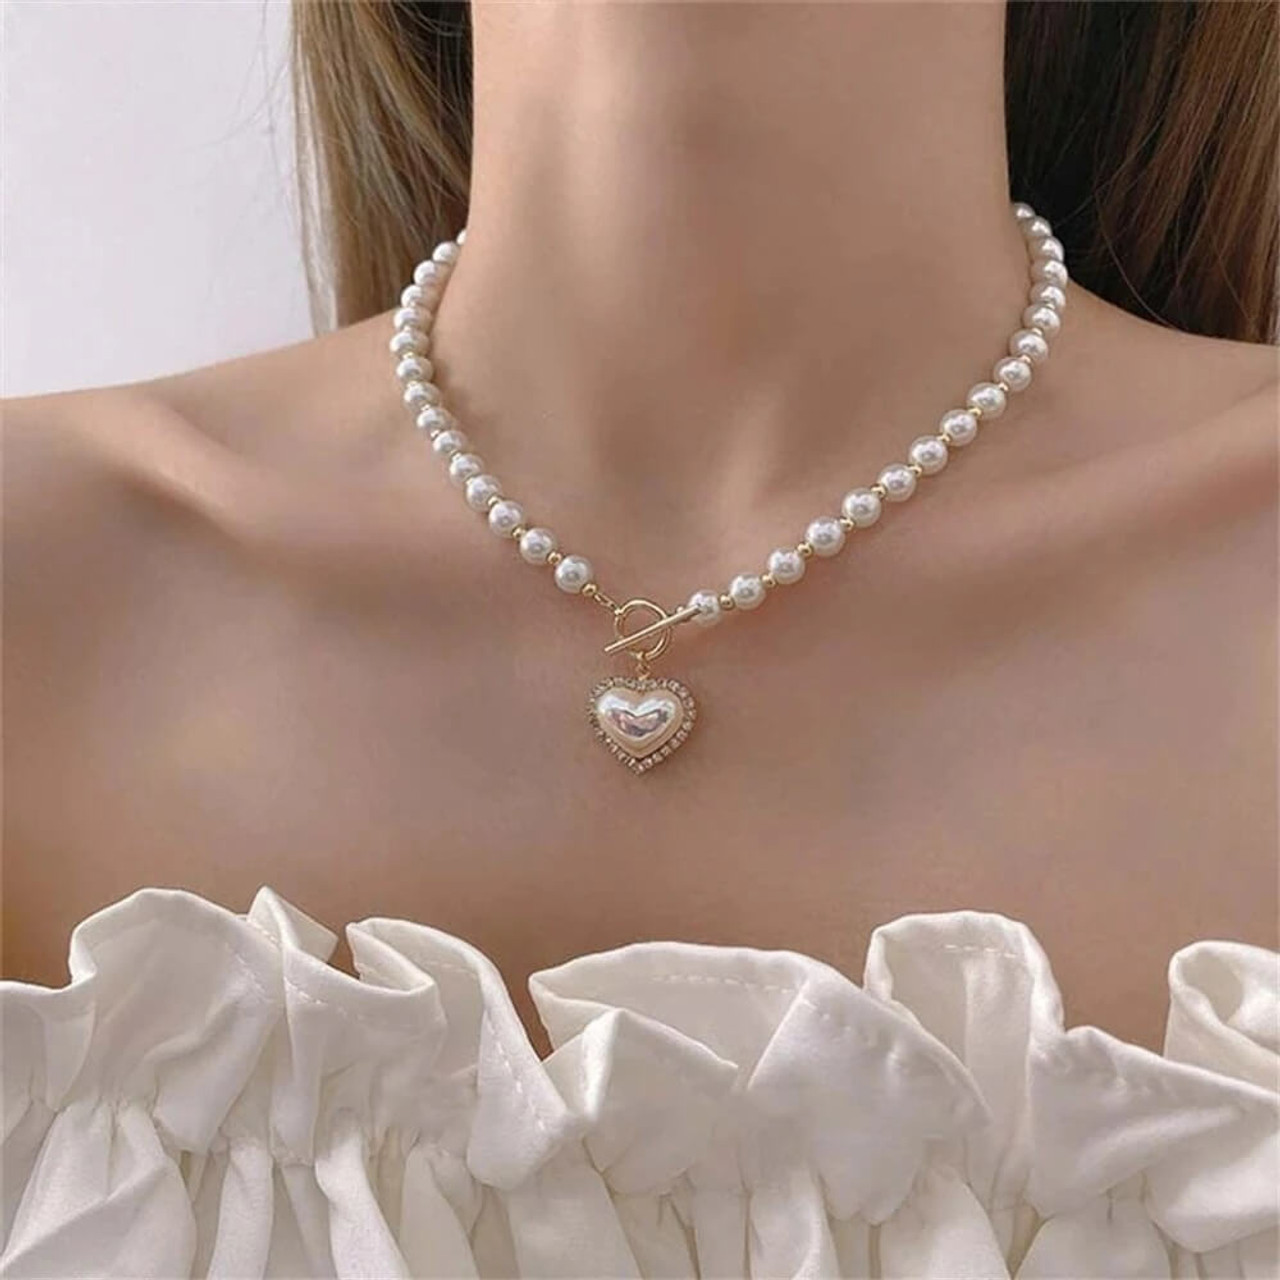  Gpurplebud Pearl Heart Necklace Choker - Coquette Necklace  Jewelry for Women Girls Adjustable Gold Plated Faux Pearl Necklaces Trendy  Gifts Daily Fashion : Clothing, Shoes & Jewelry